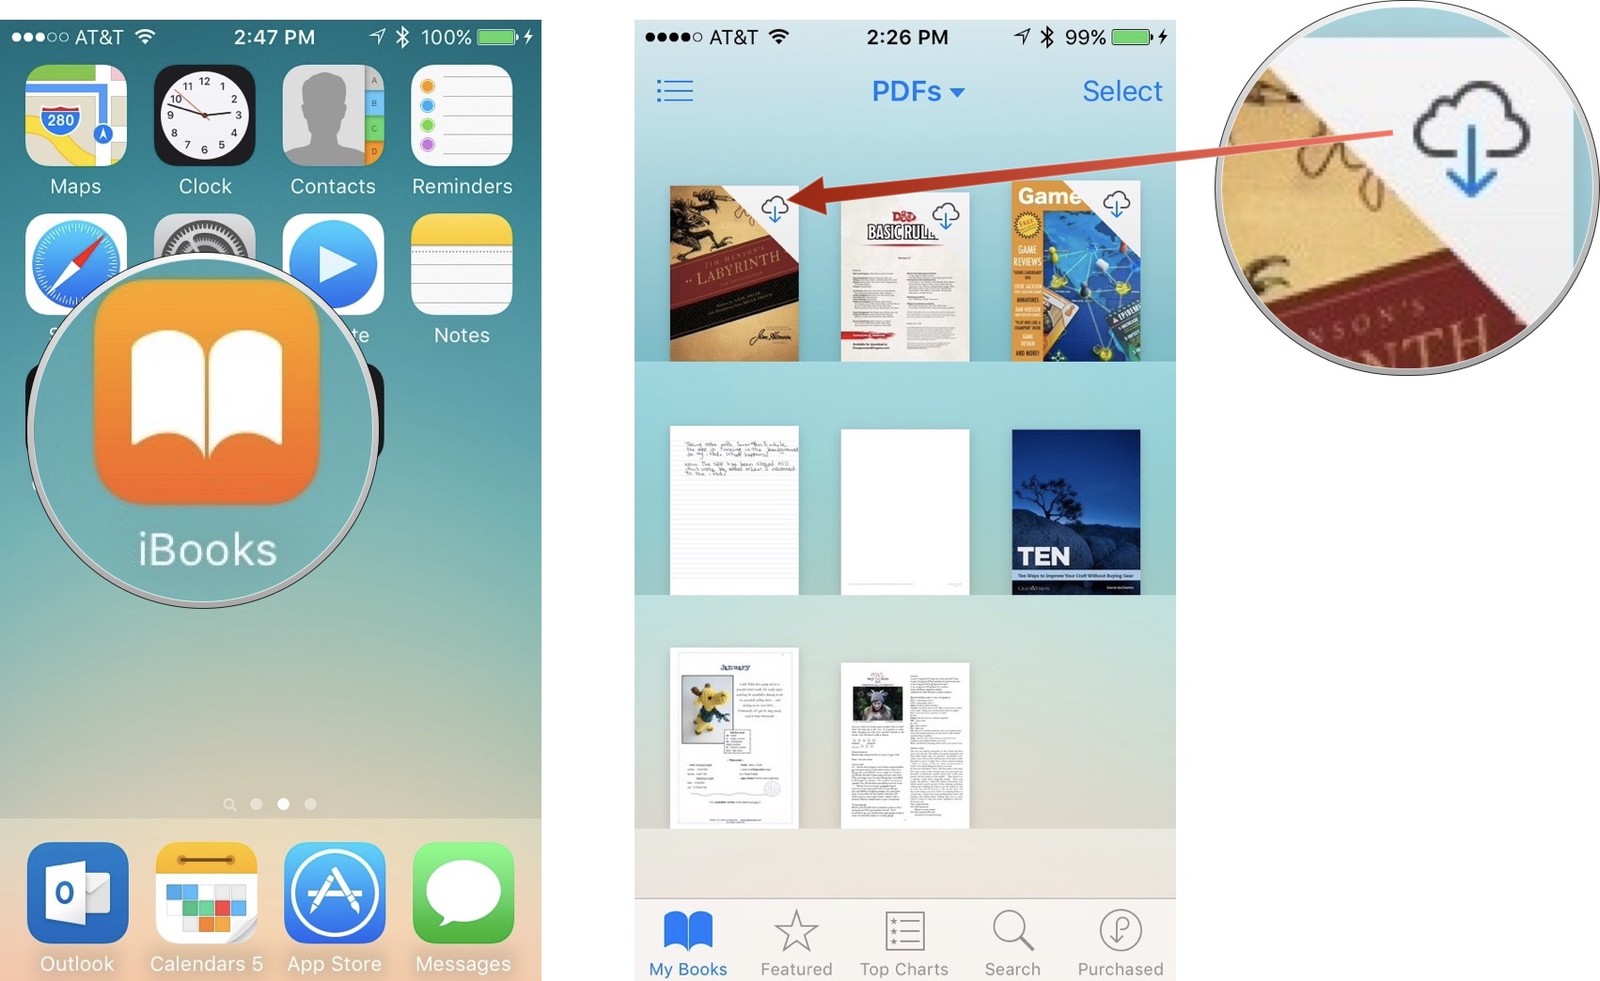 How to download books on ipad air